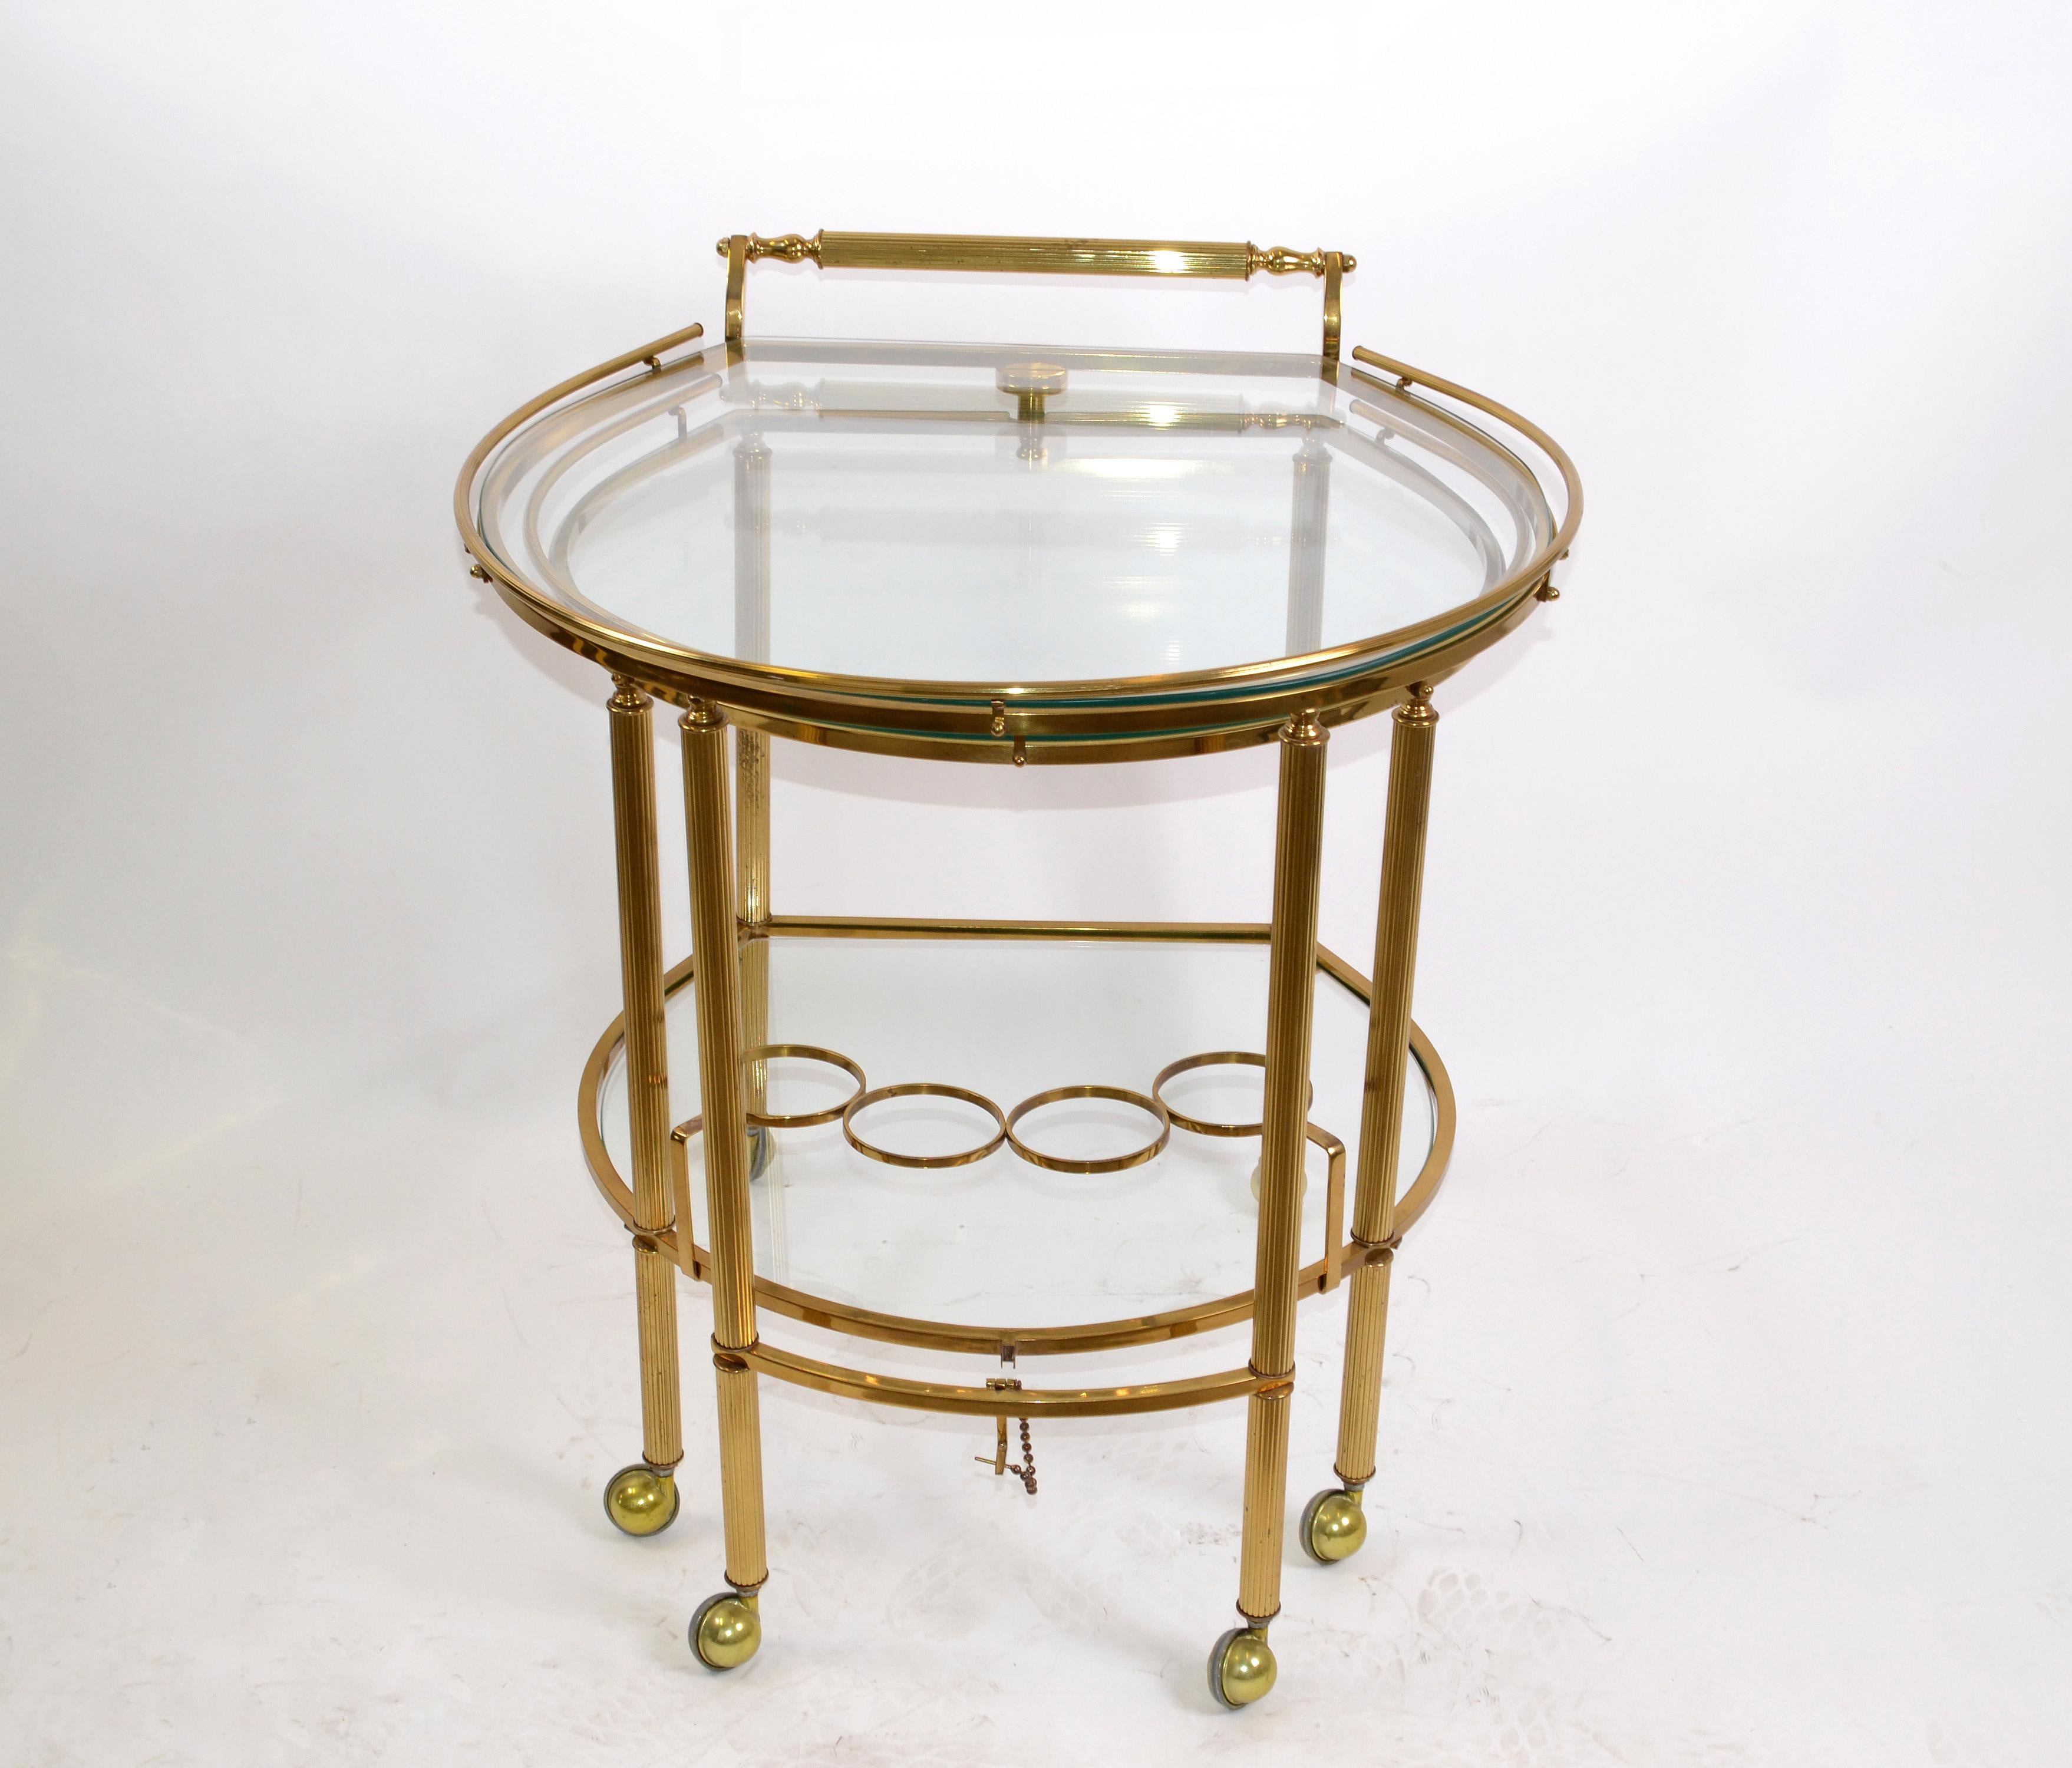 Mid-Century Modern brass and glass extendable two table bar cart, trolley on casters made in Italy, 1960.
Can be arranged in different angles around a sofa, table or dry bar.
Listed with the dimensions extended.
Measurements:
Big table: Length